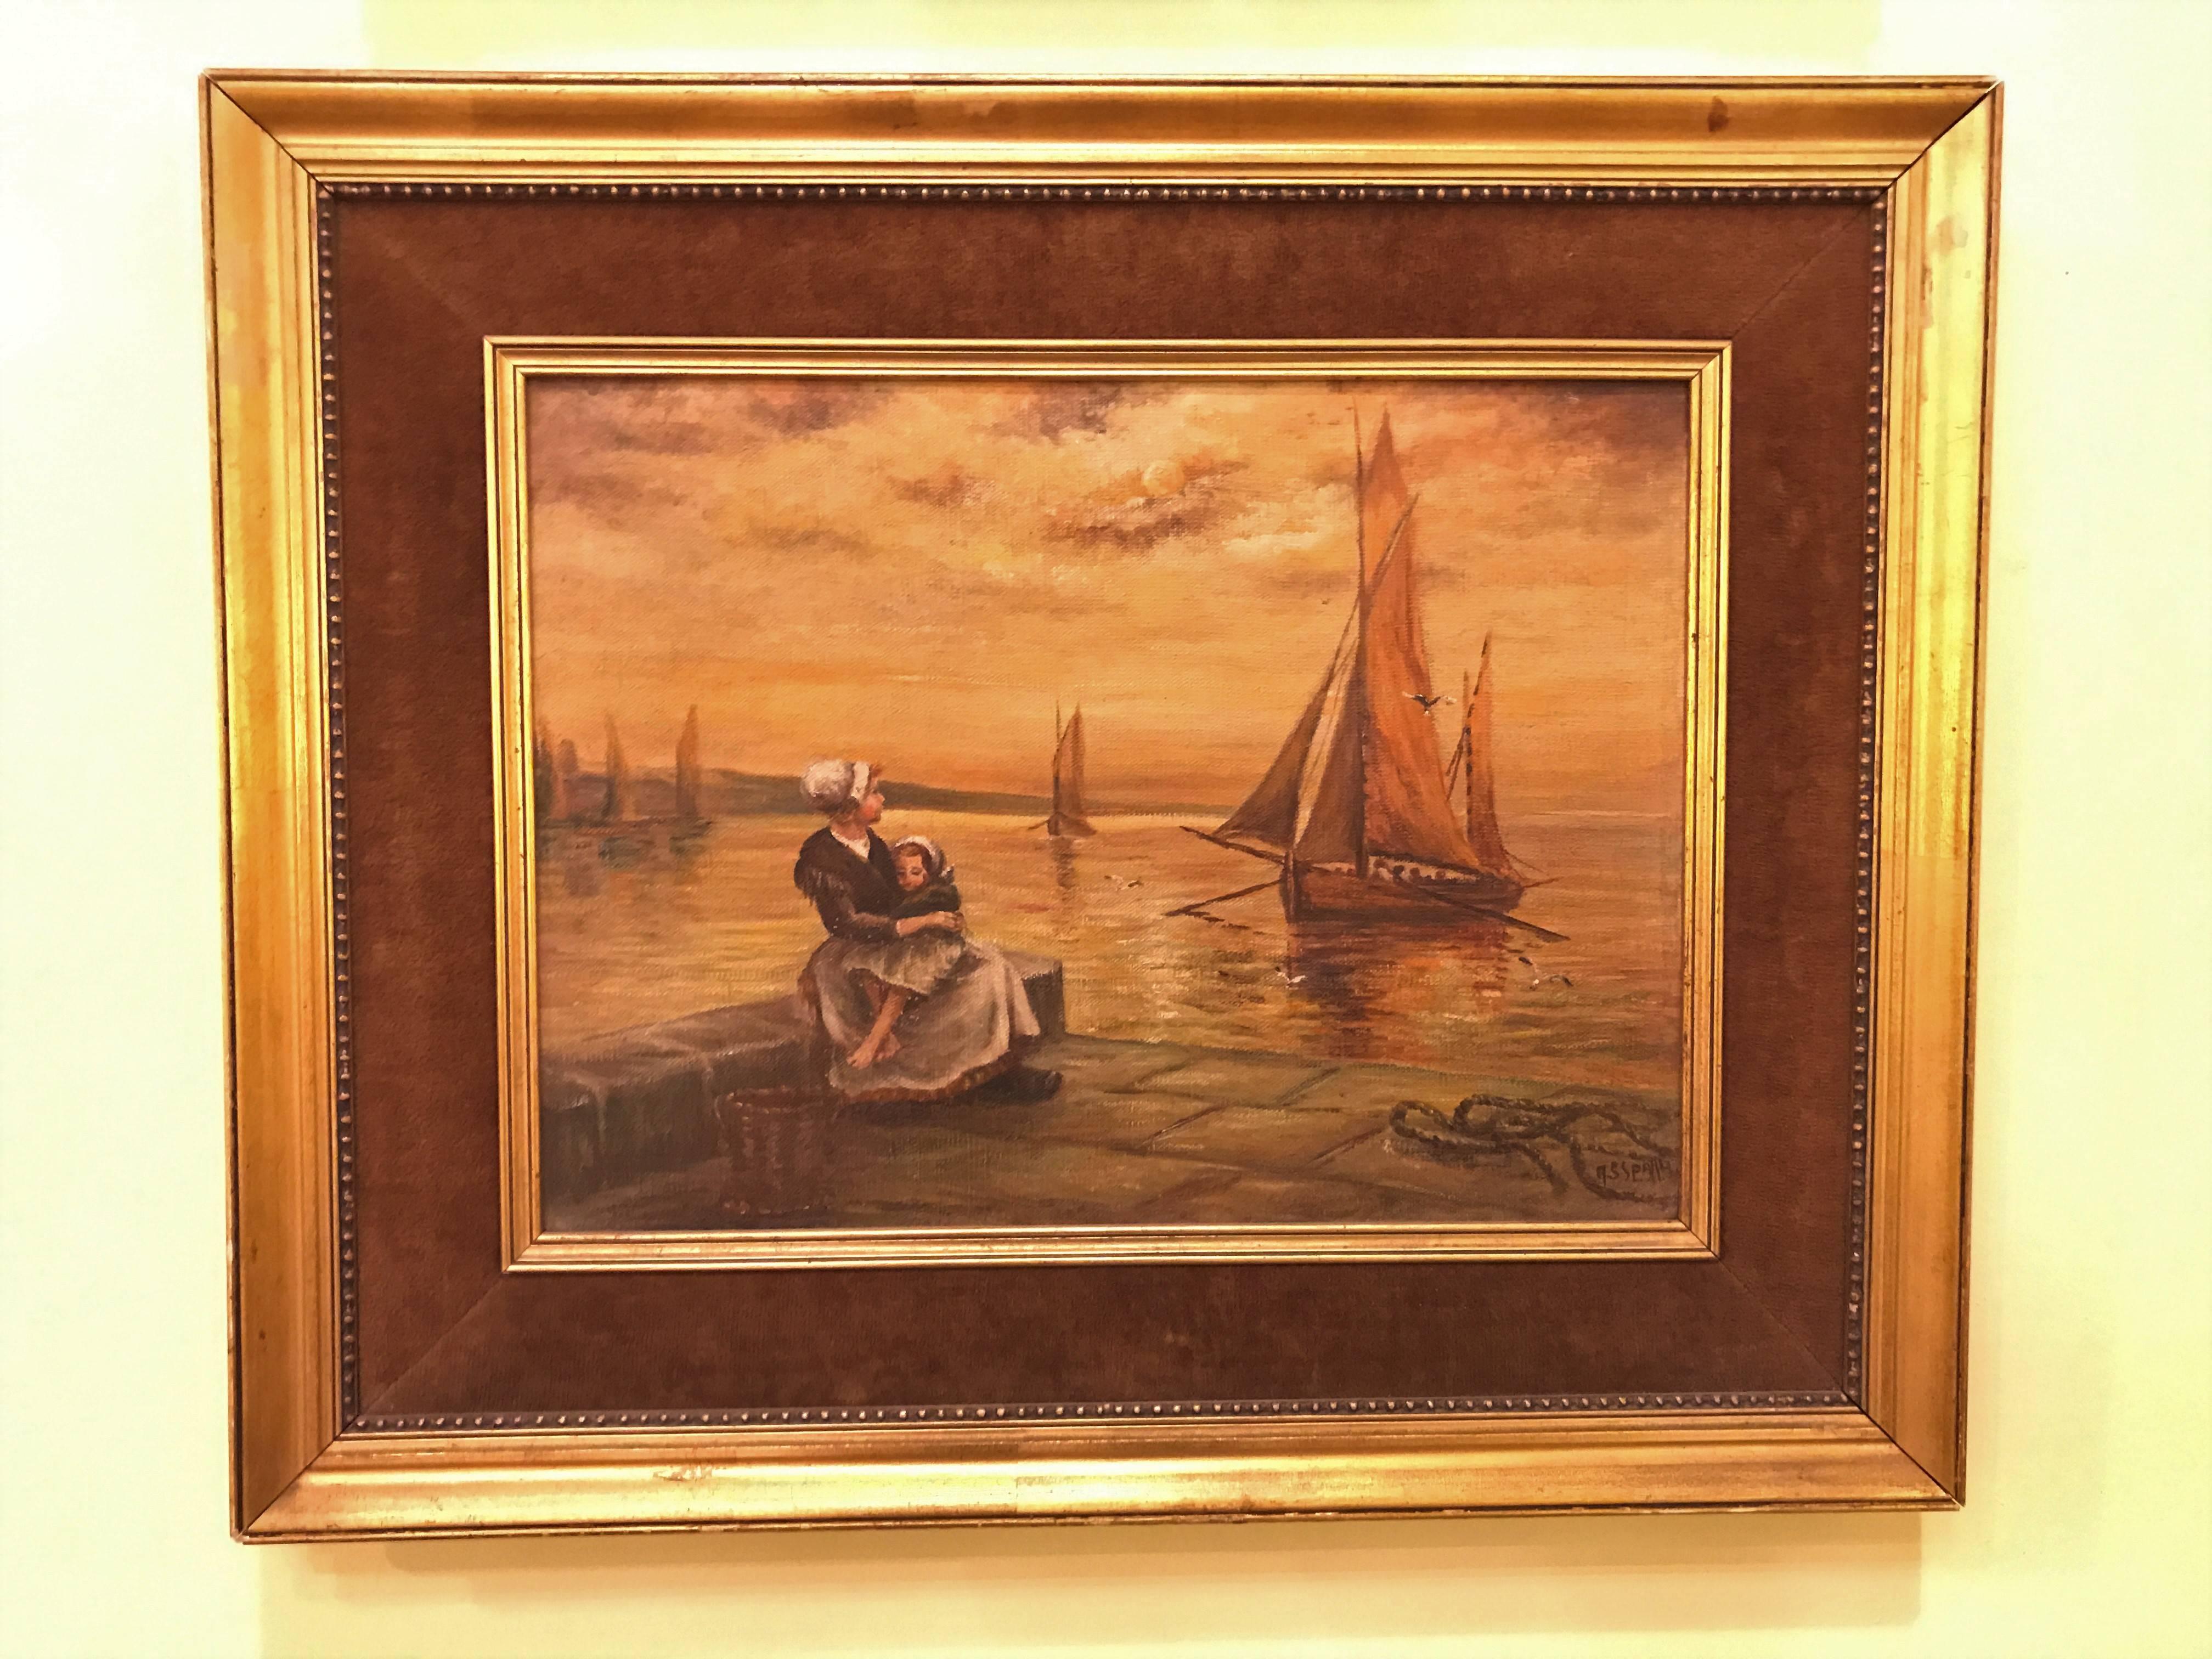 Oil on canvas 19th century of a woman and child sitting at the pier. This finely detailed and popular scene sits in a gilt gold frame and depicts what appears to be a mother and child looking out at the port for their father and husband to come